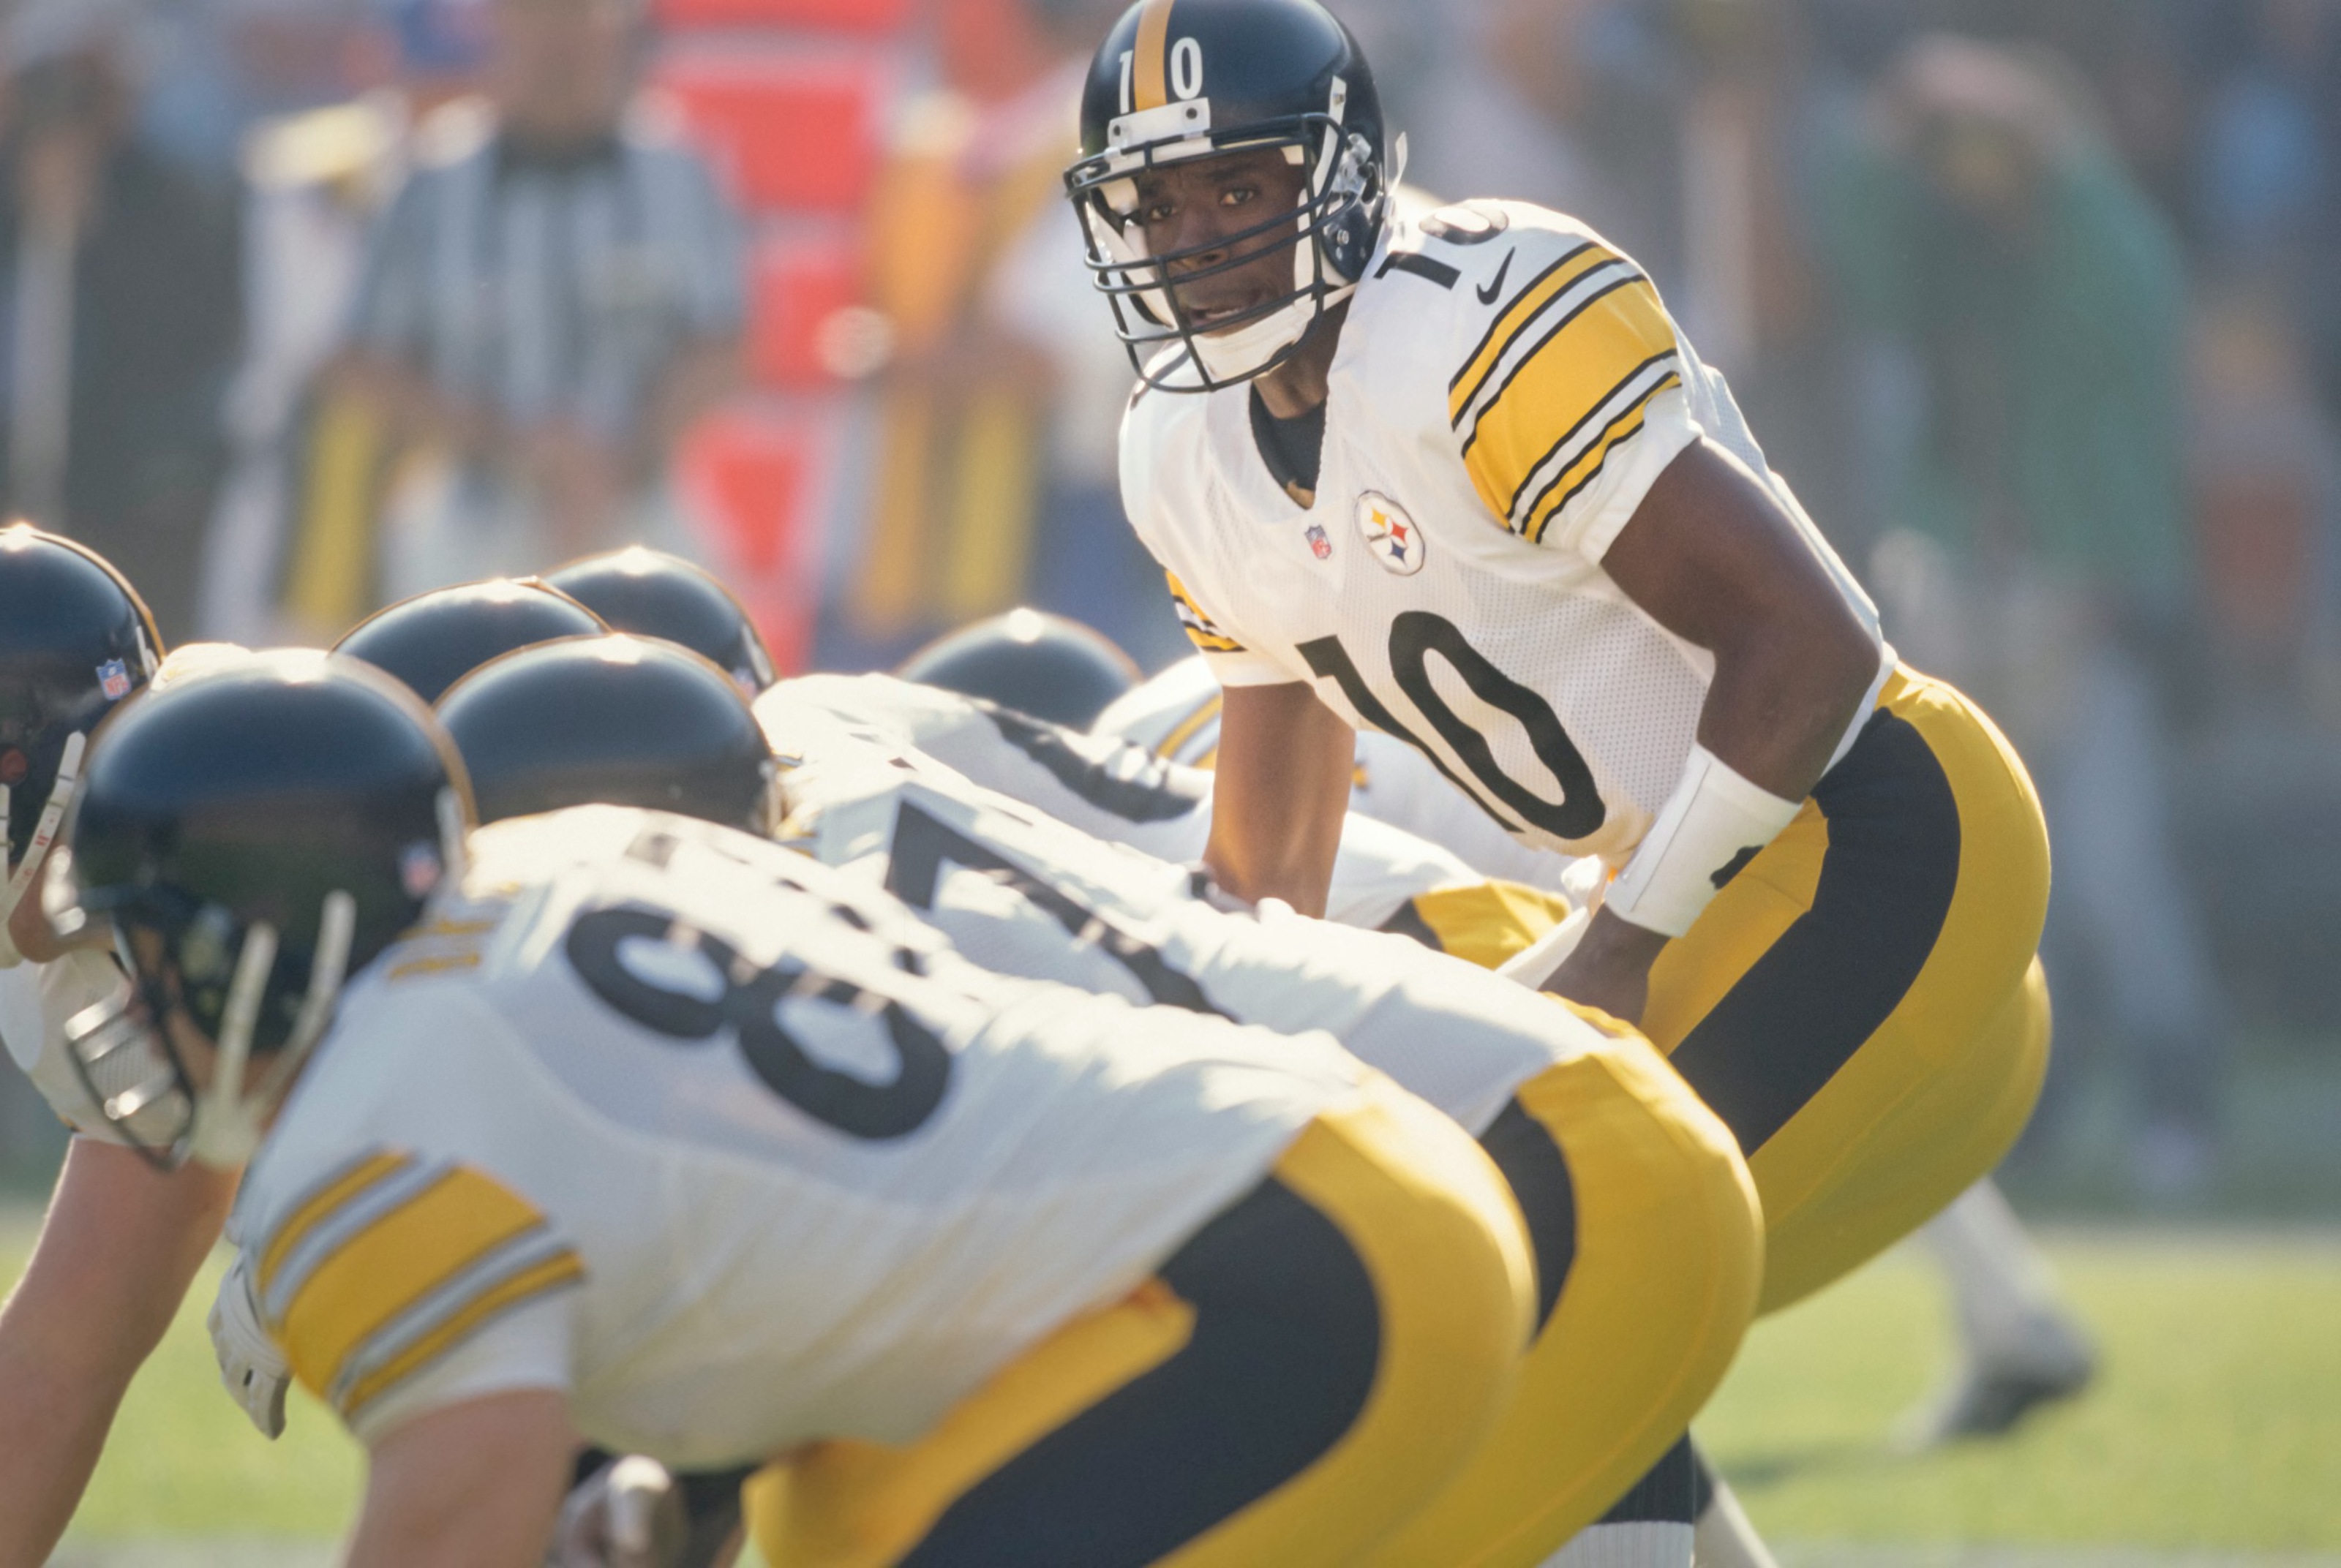 5-greatest-pittsburgh-steelers-quarterbacks-of-all-time-page-3